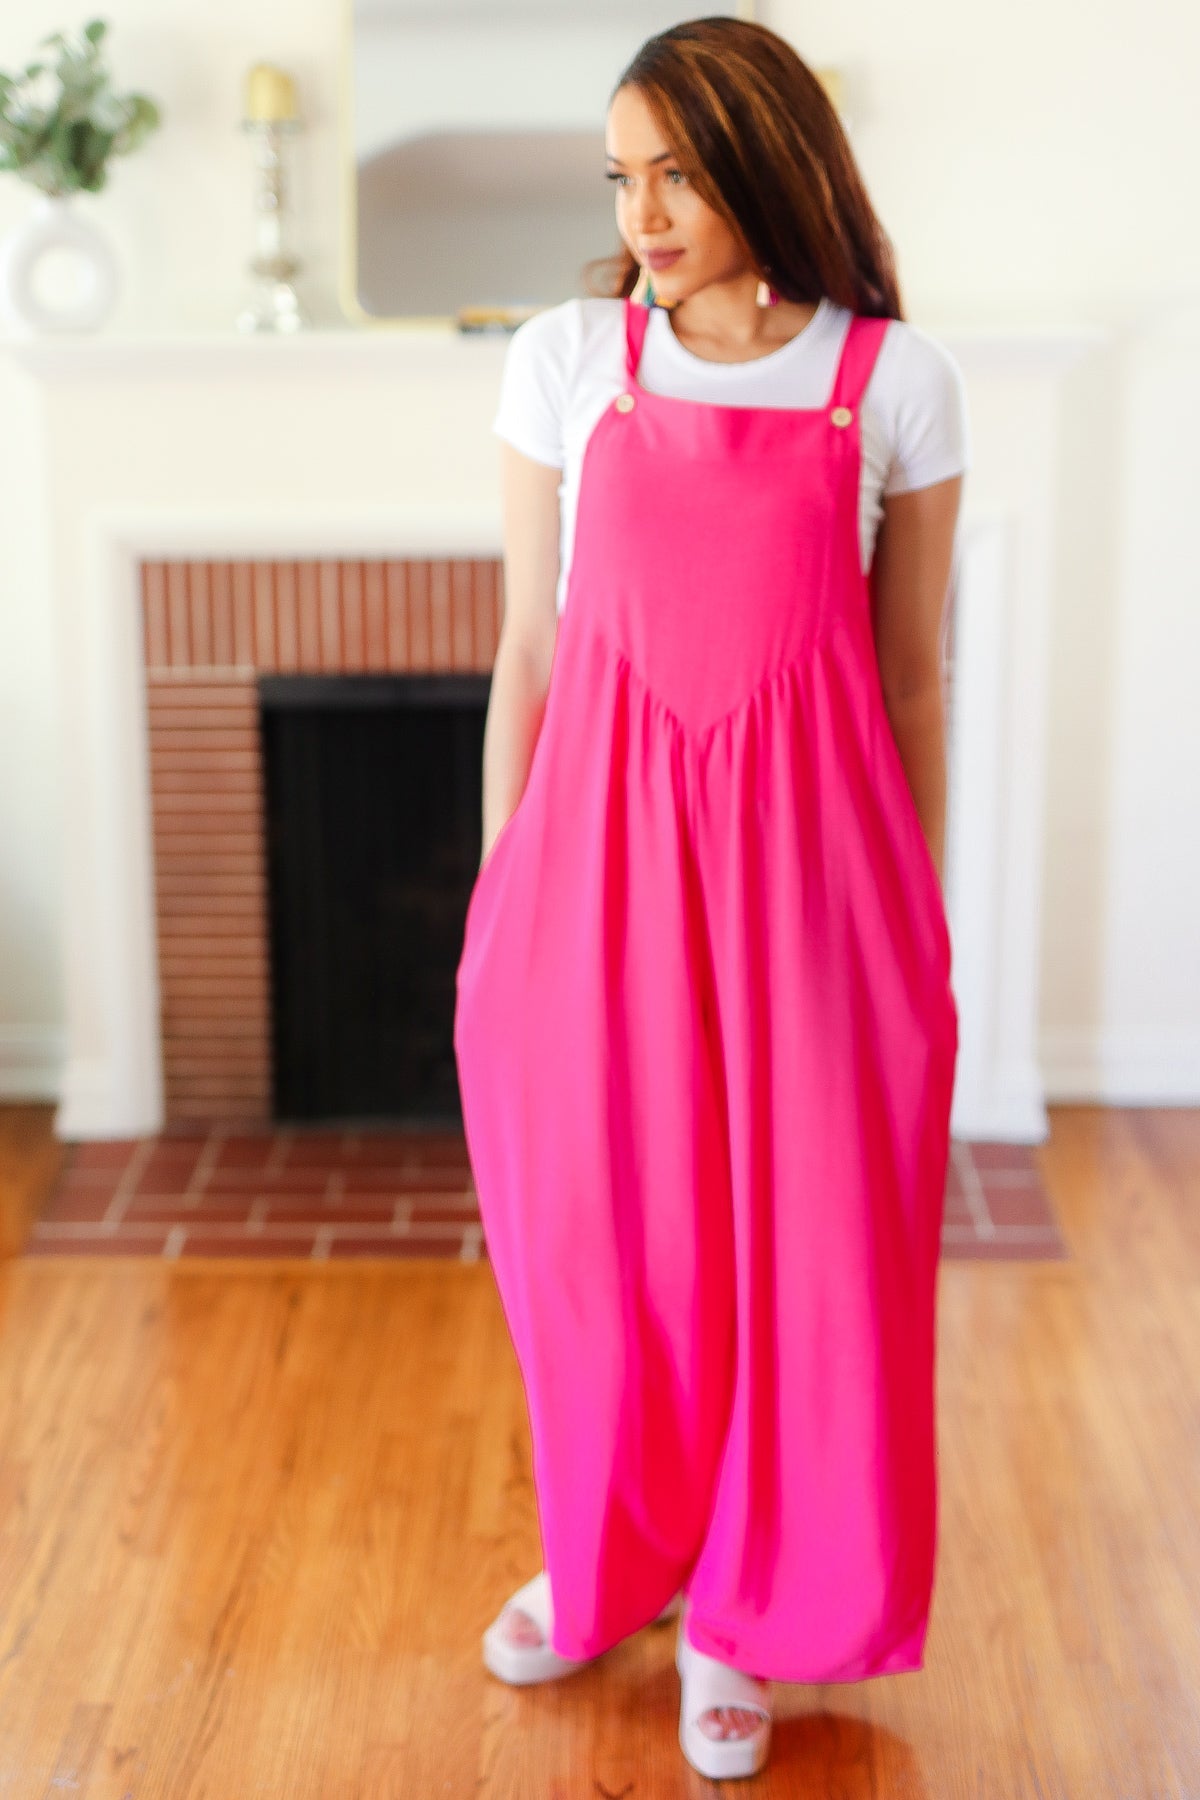 Summer Dreaming Overall Jumpsuit in Pink